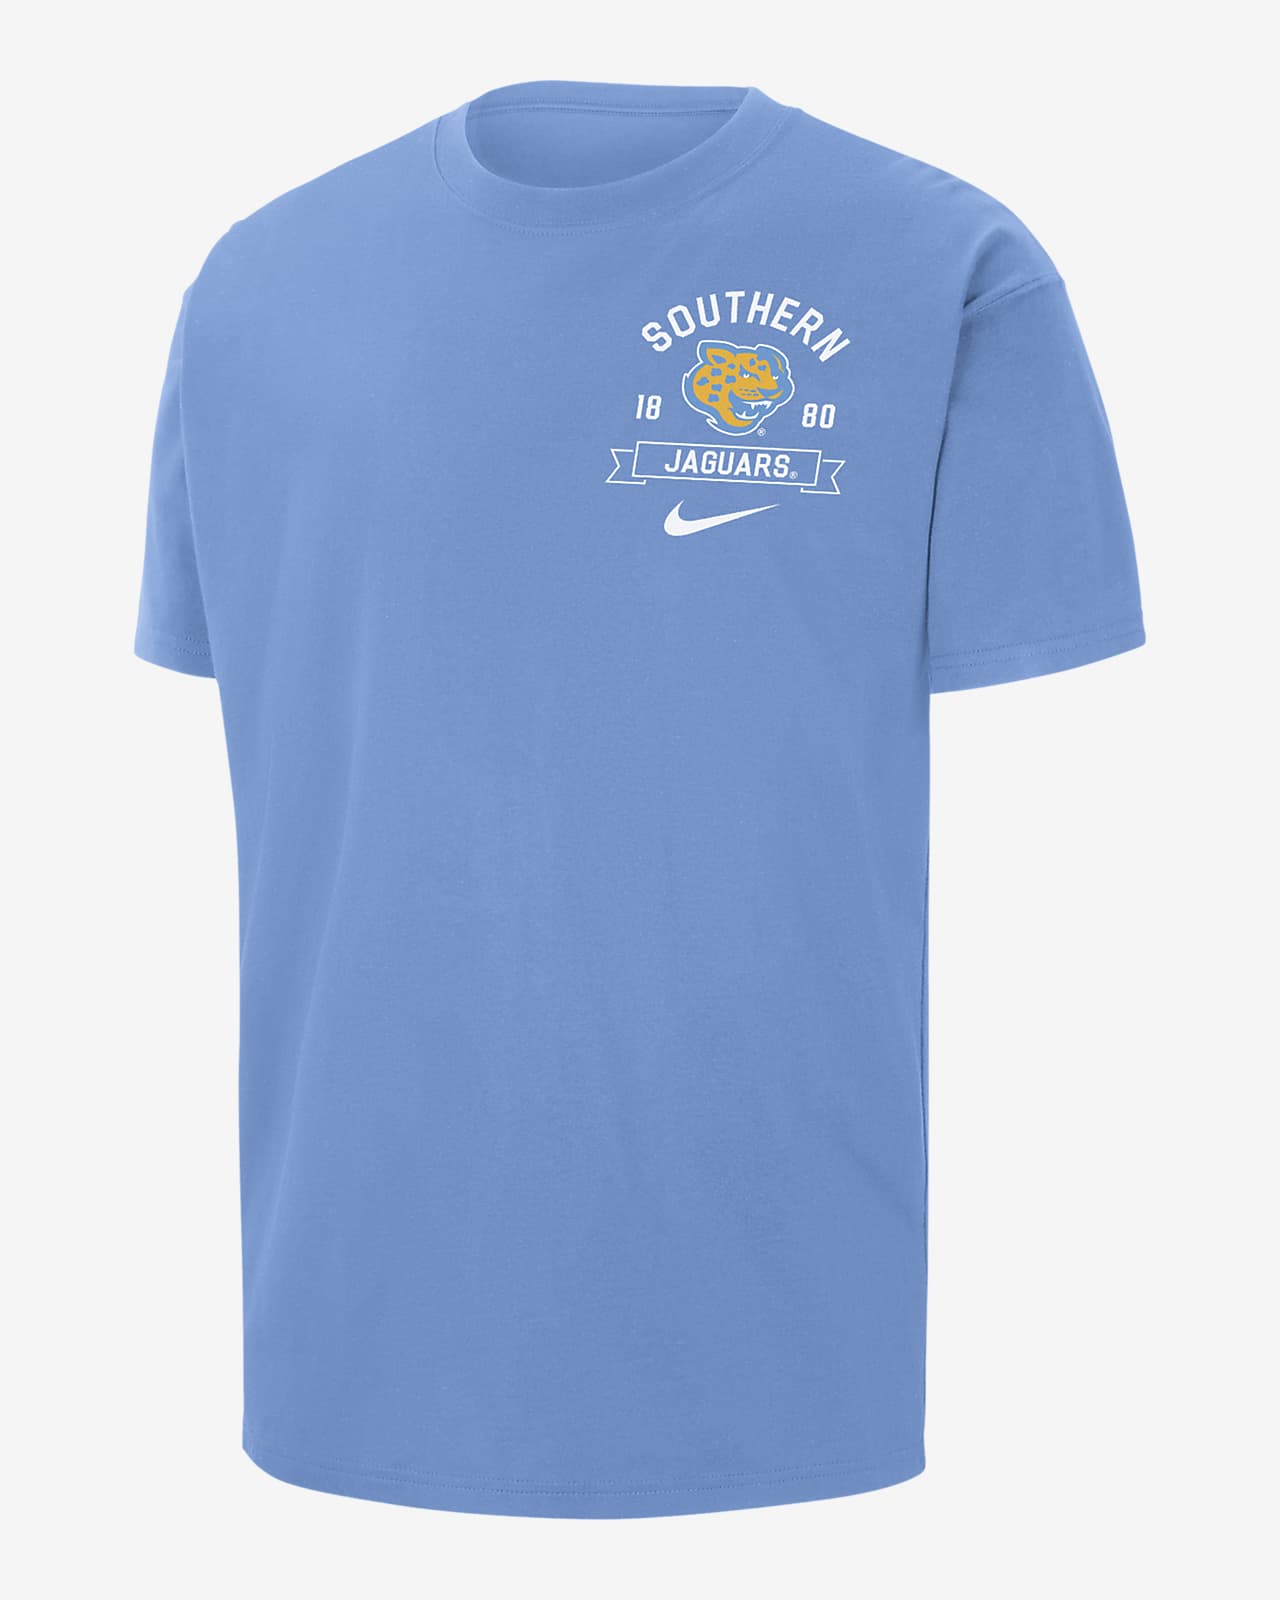 Southern Max90 Men's Nike College T-Shirt